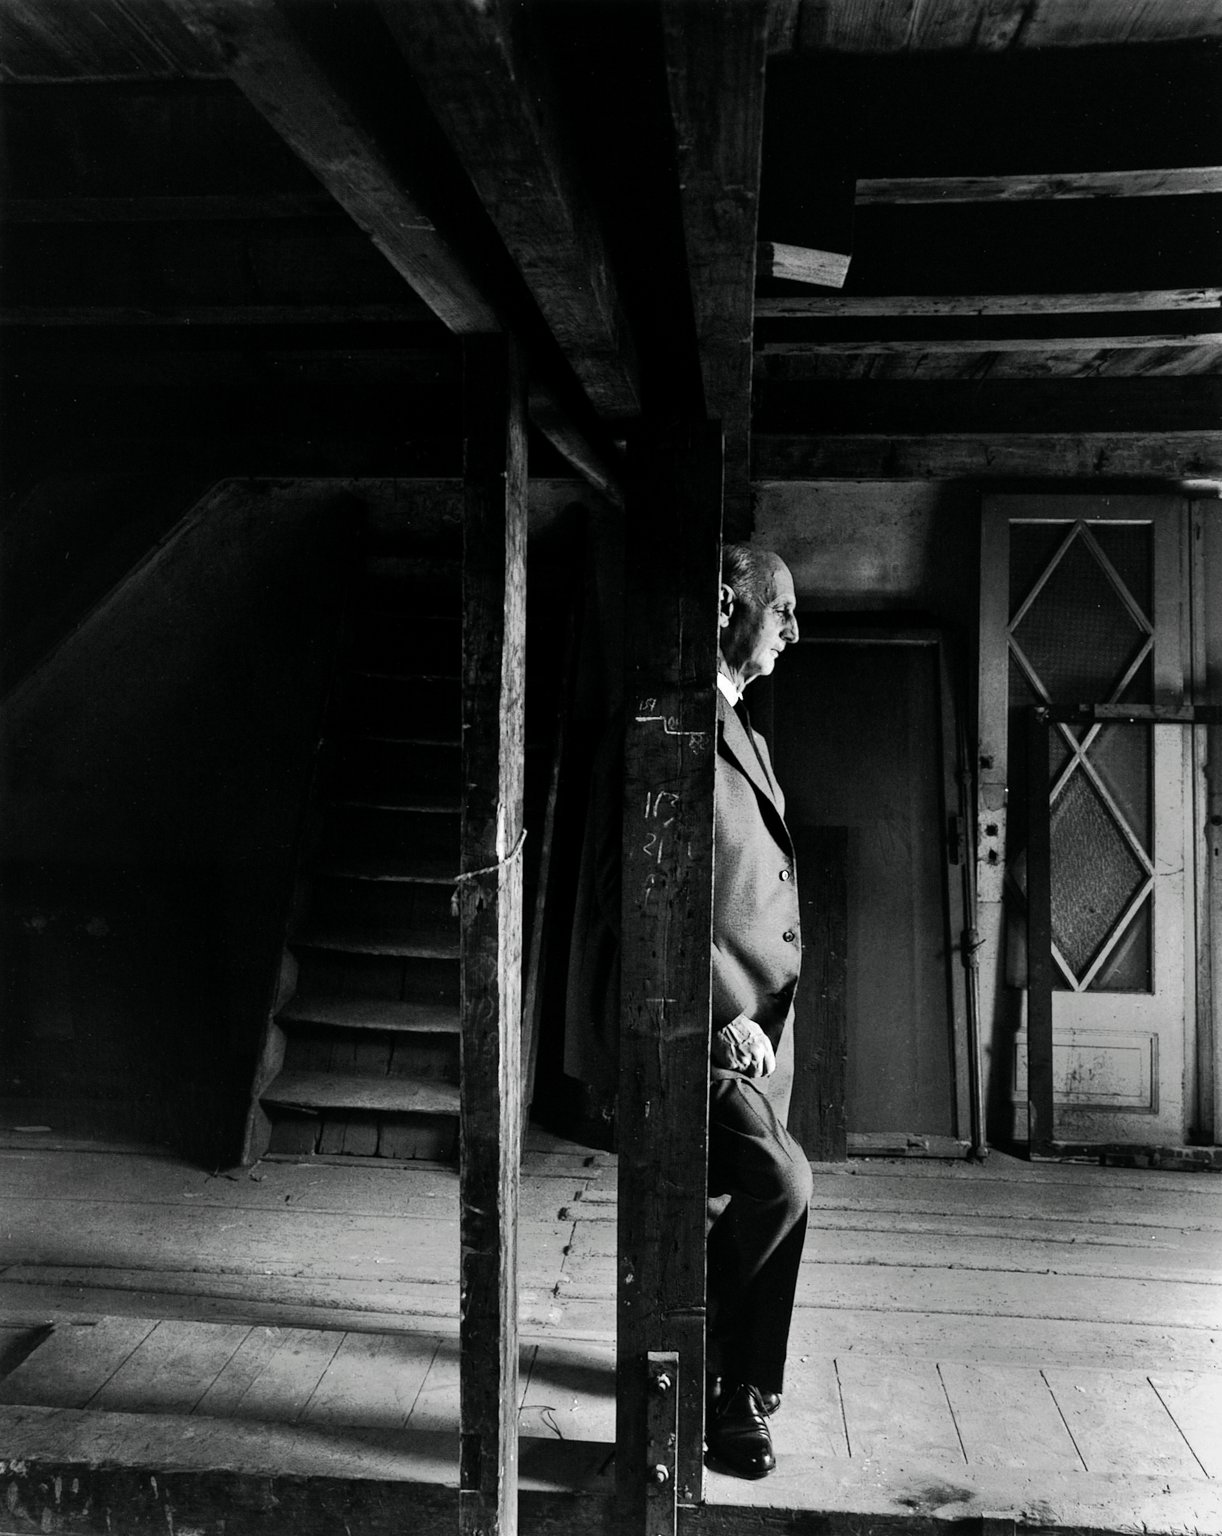 Otto Frank in the attic of the Secret Annex, a few hours before the official opening of the Anne Frank House on 3 May 1960.